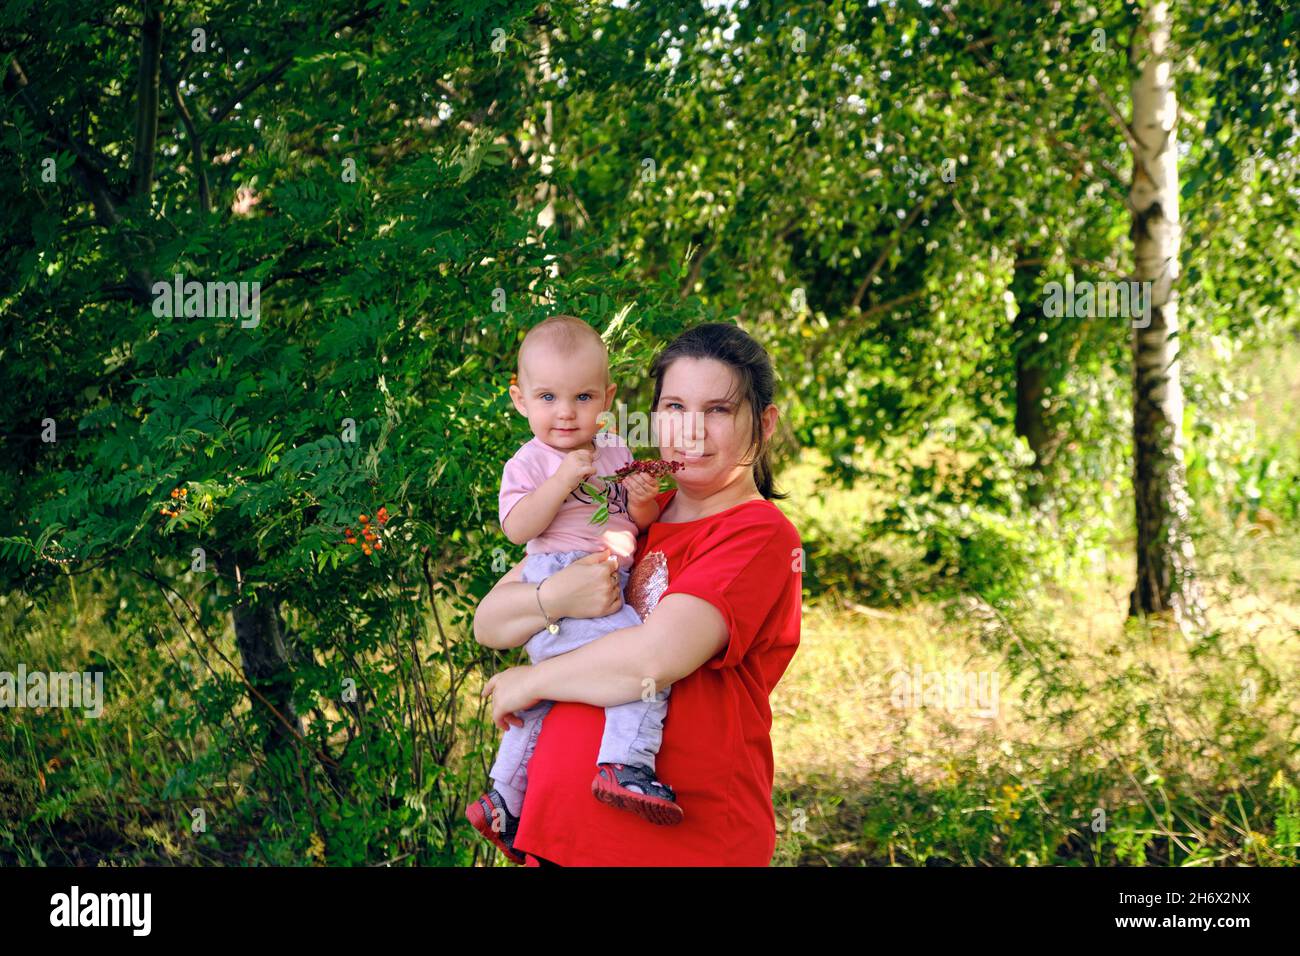 half-length view of a young woman with a baby in the forest standing against the background of green trees betula pendula and sorbus aucuparia Stock Photo